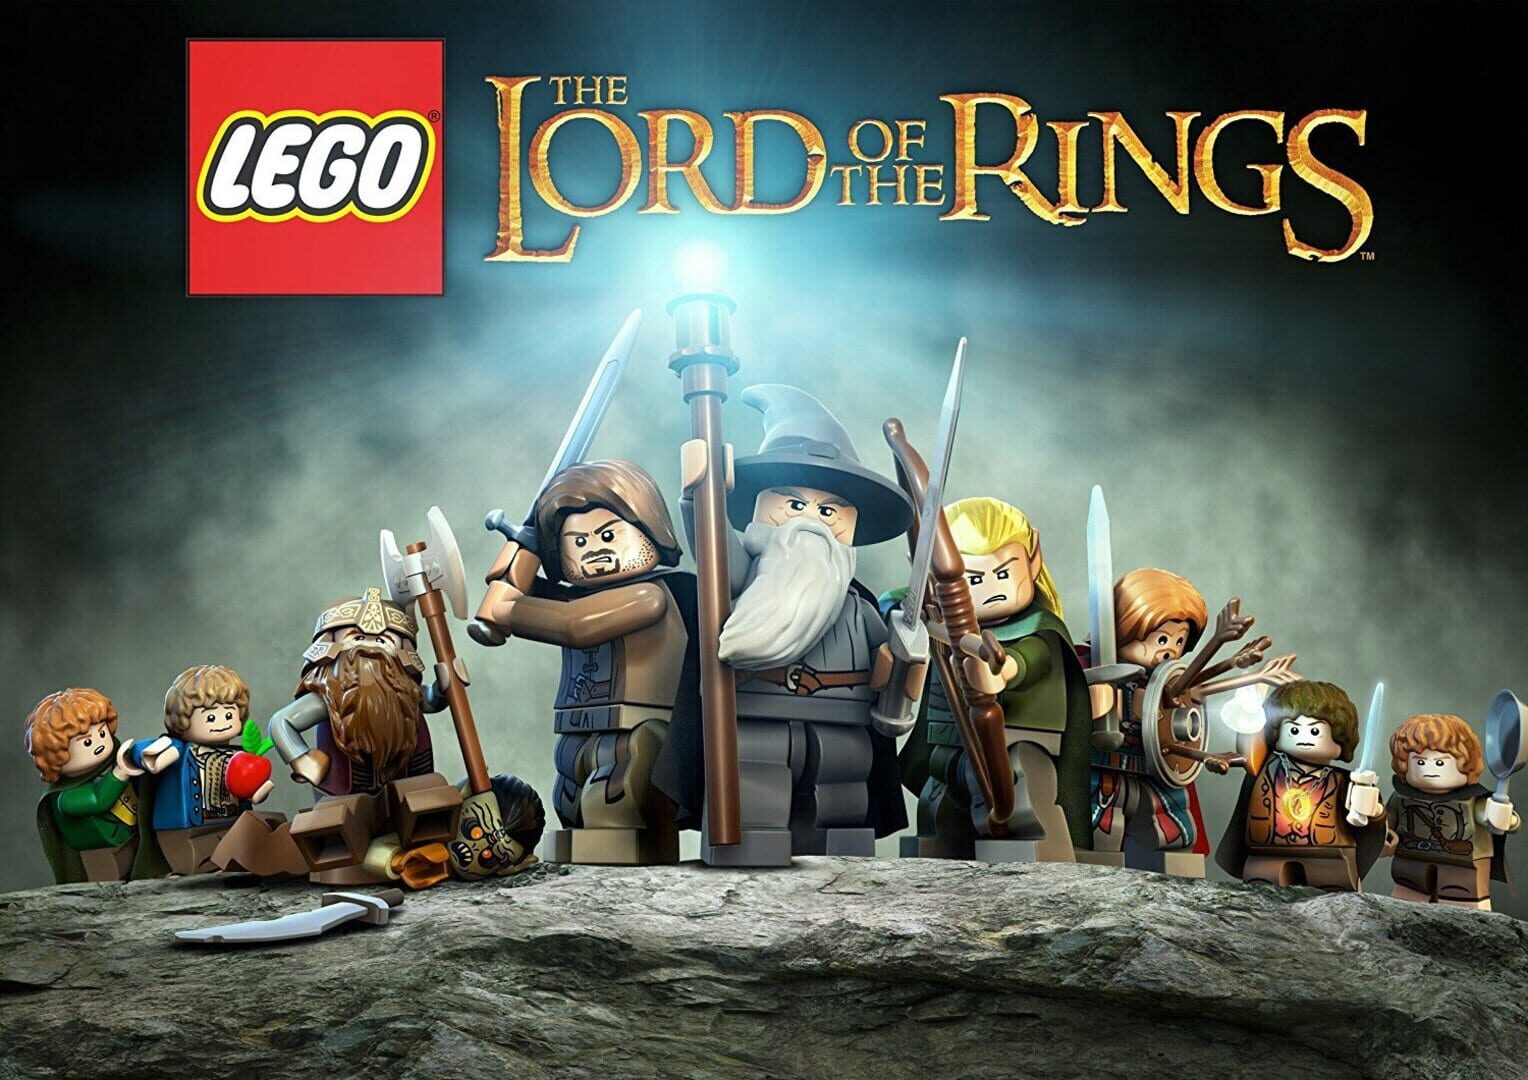 Arte - LEGO The Lord of the Rings